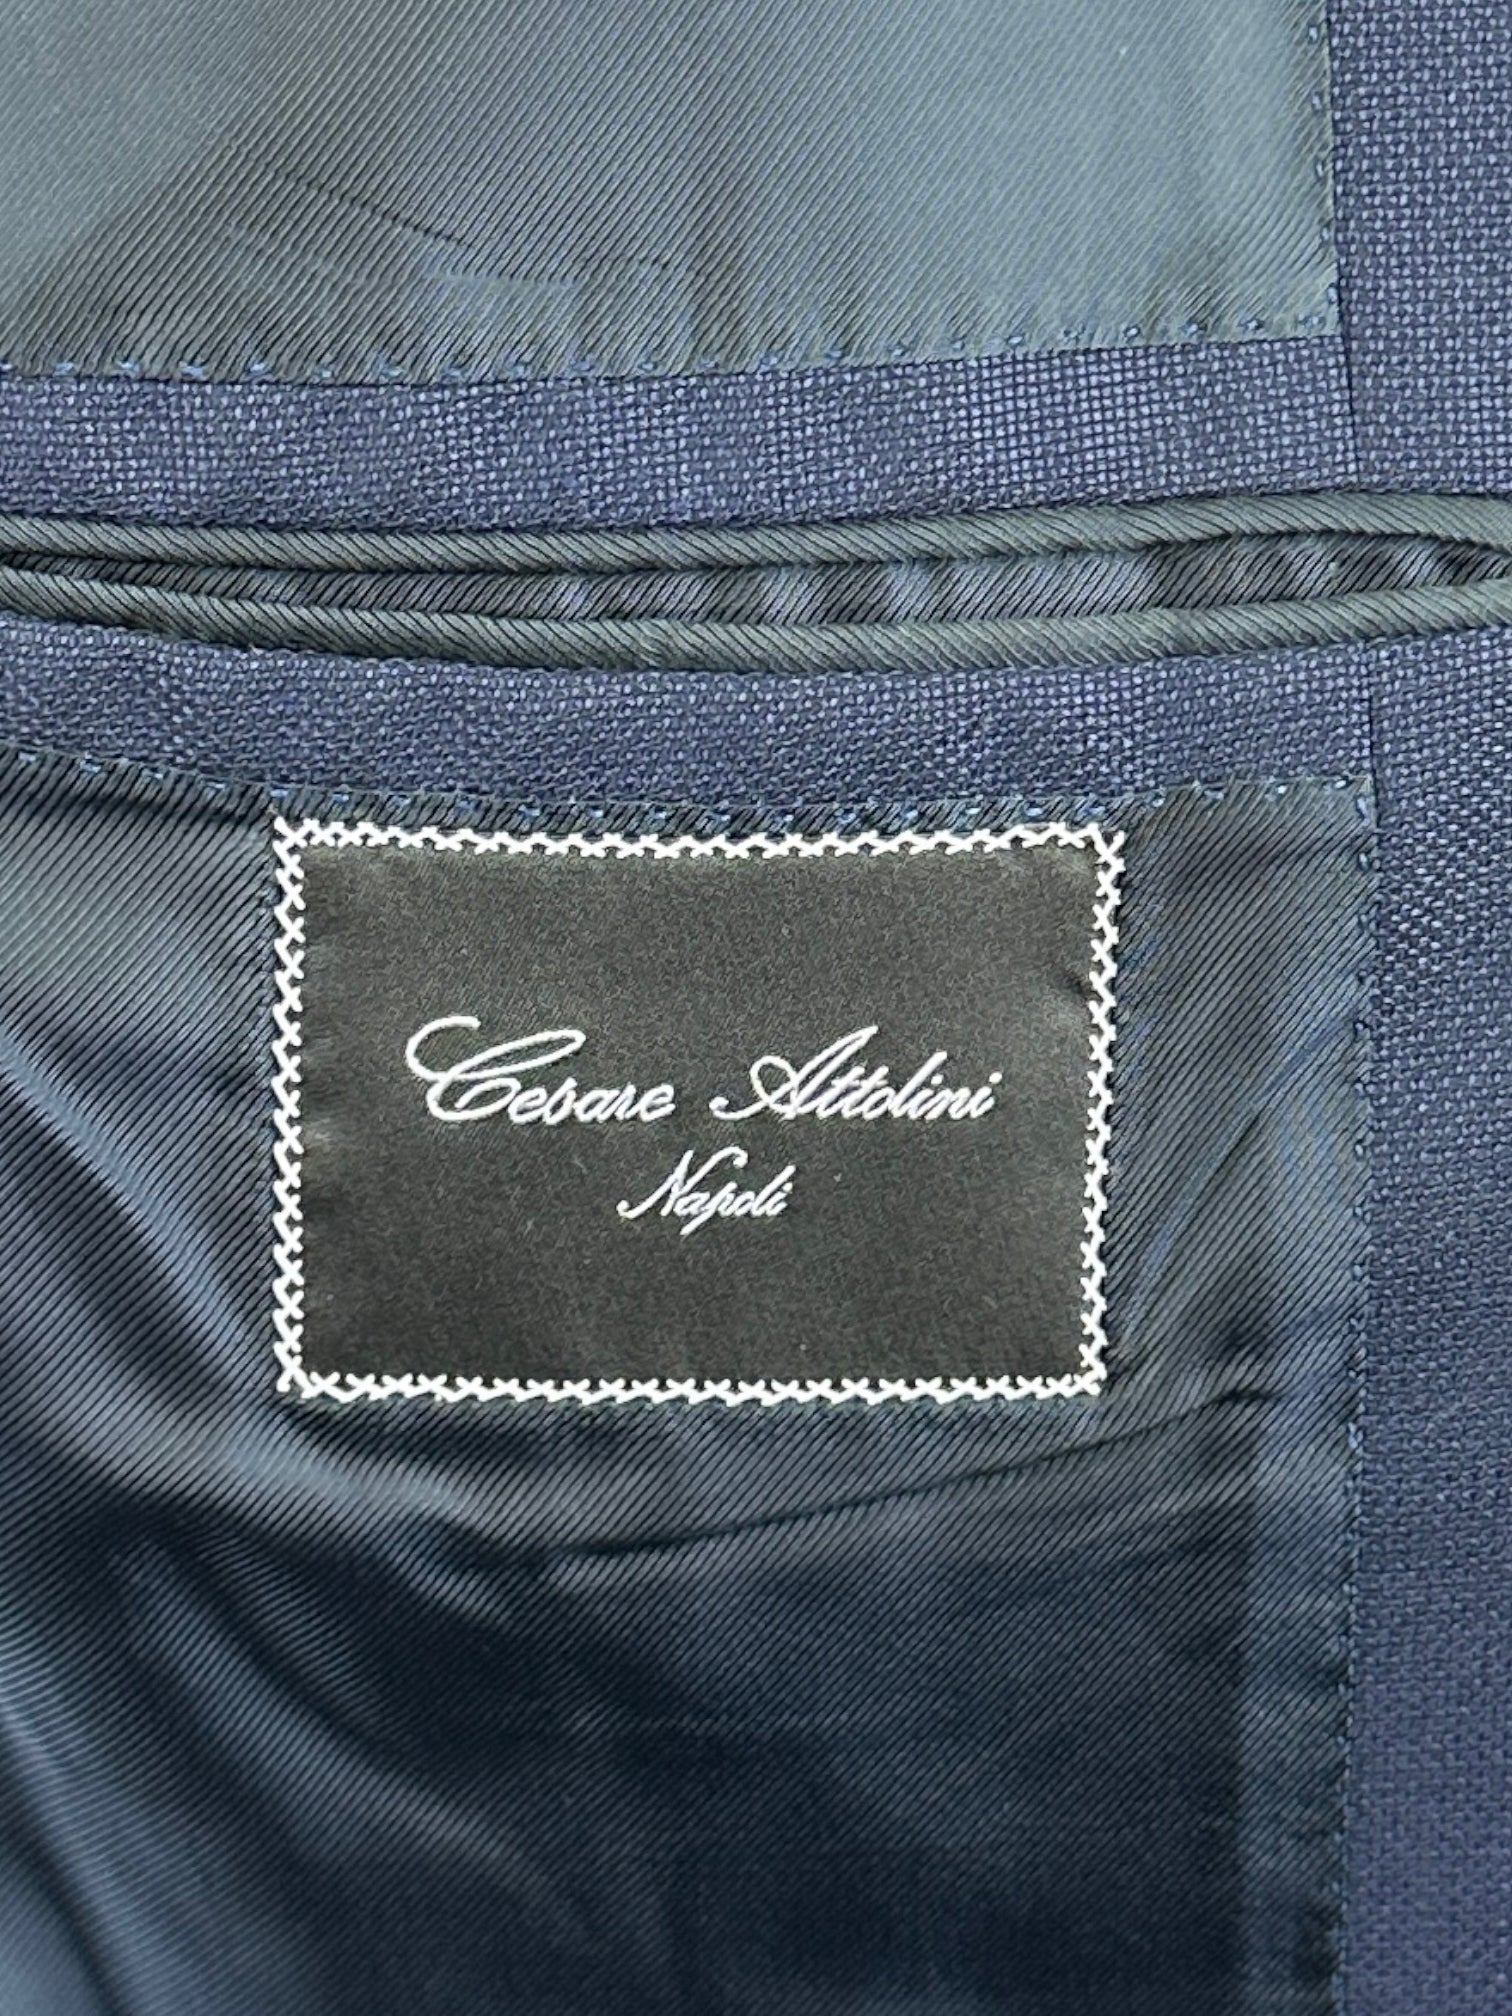 Cesare Attolini Blue Wool and Silk Blend Jacket